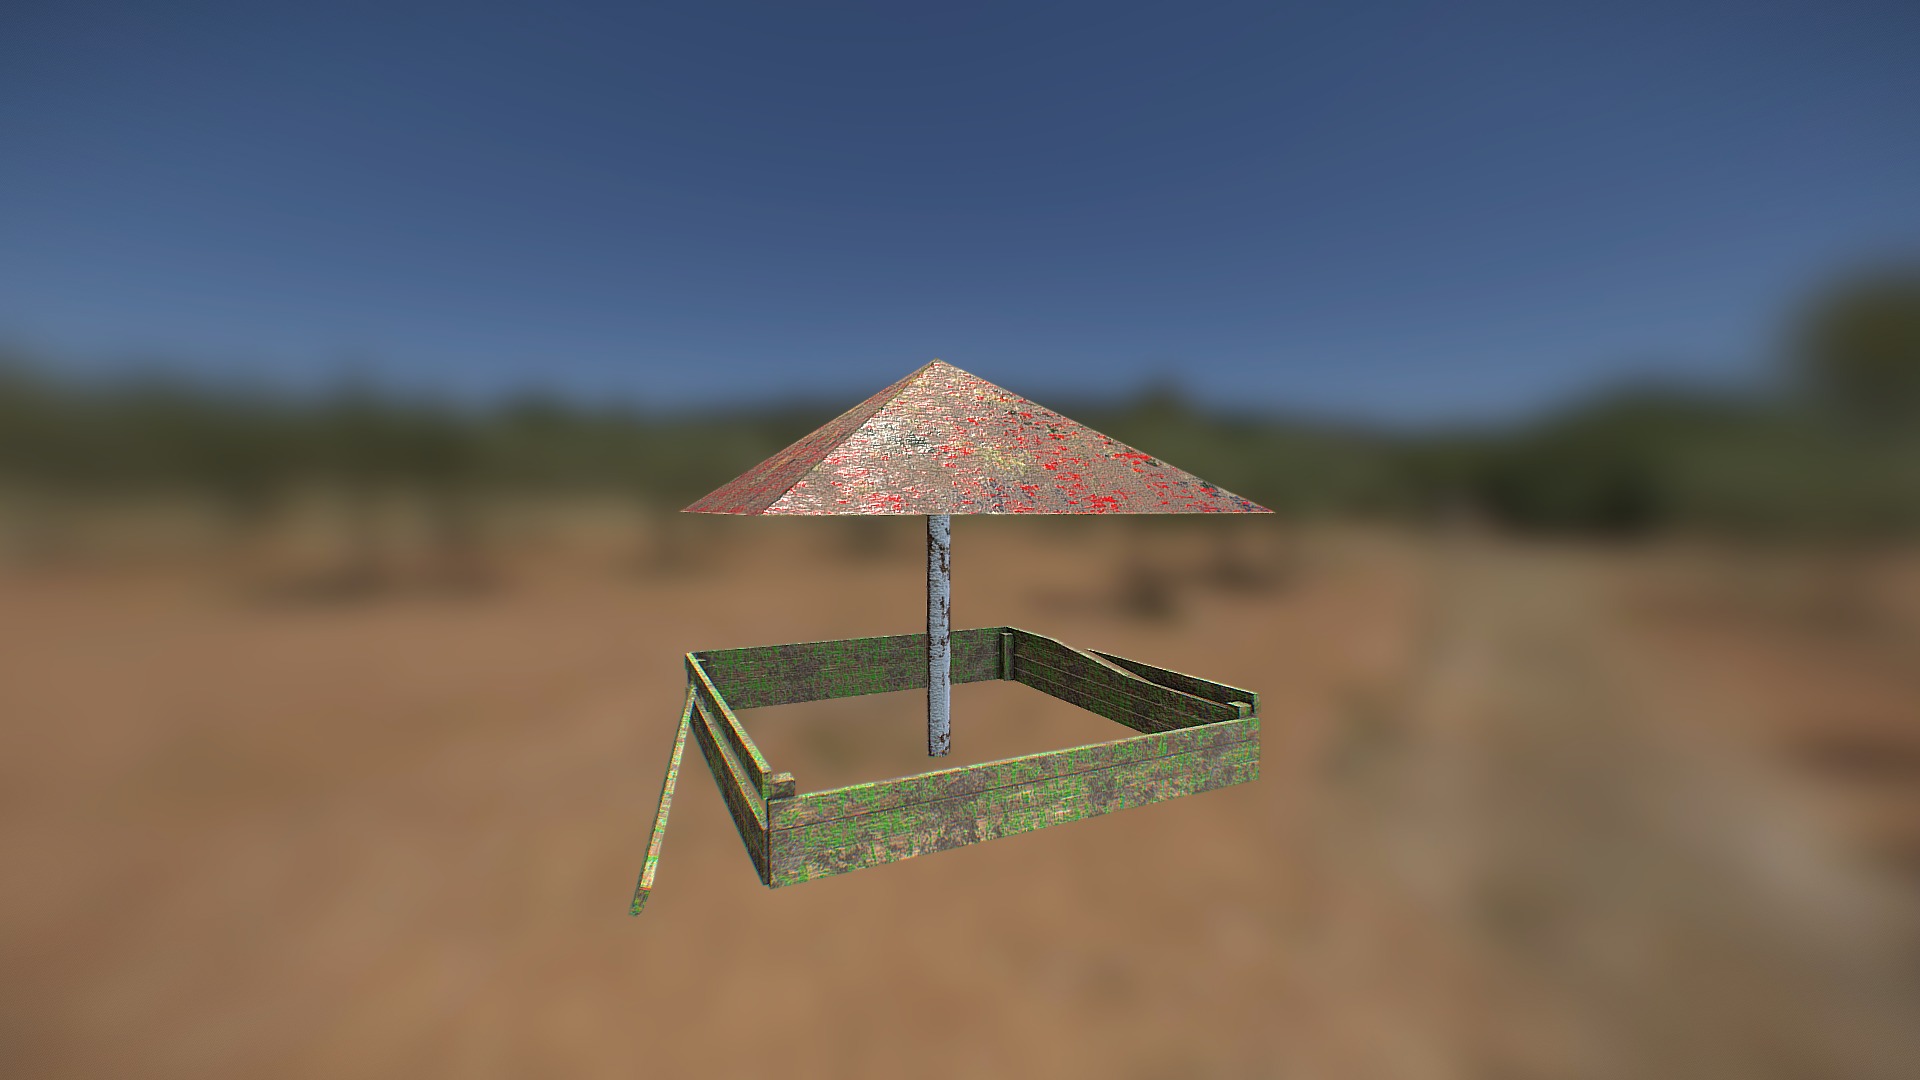 3D model Sandbox - This is a 3D model of the Sandbox. The 3D model is about a small umbrella on a small wooden table.